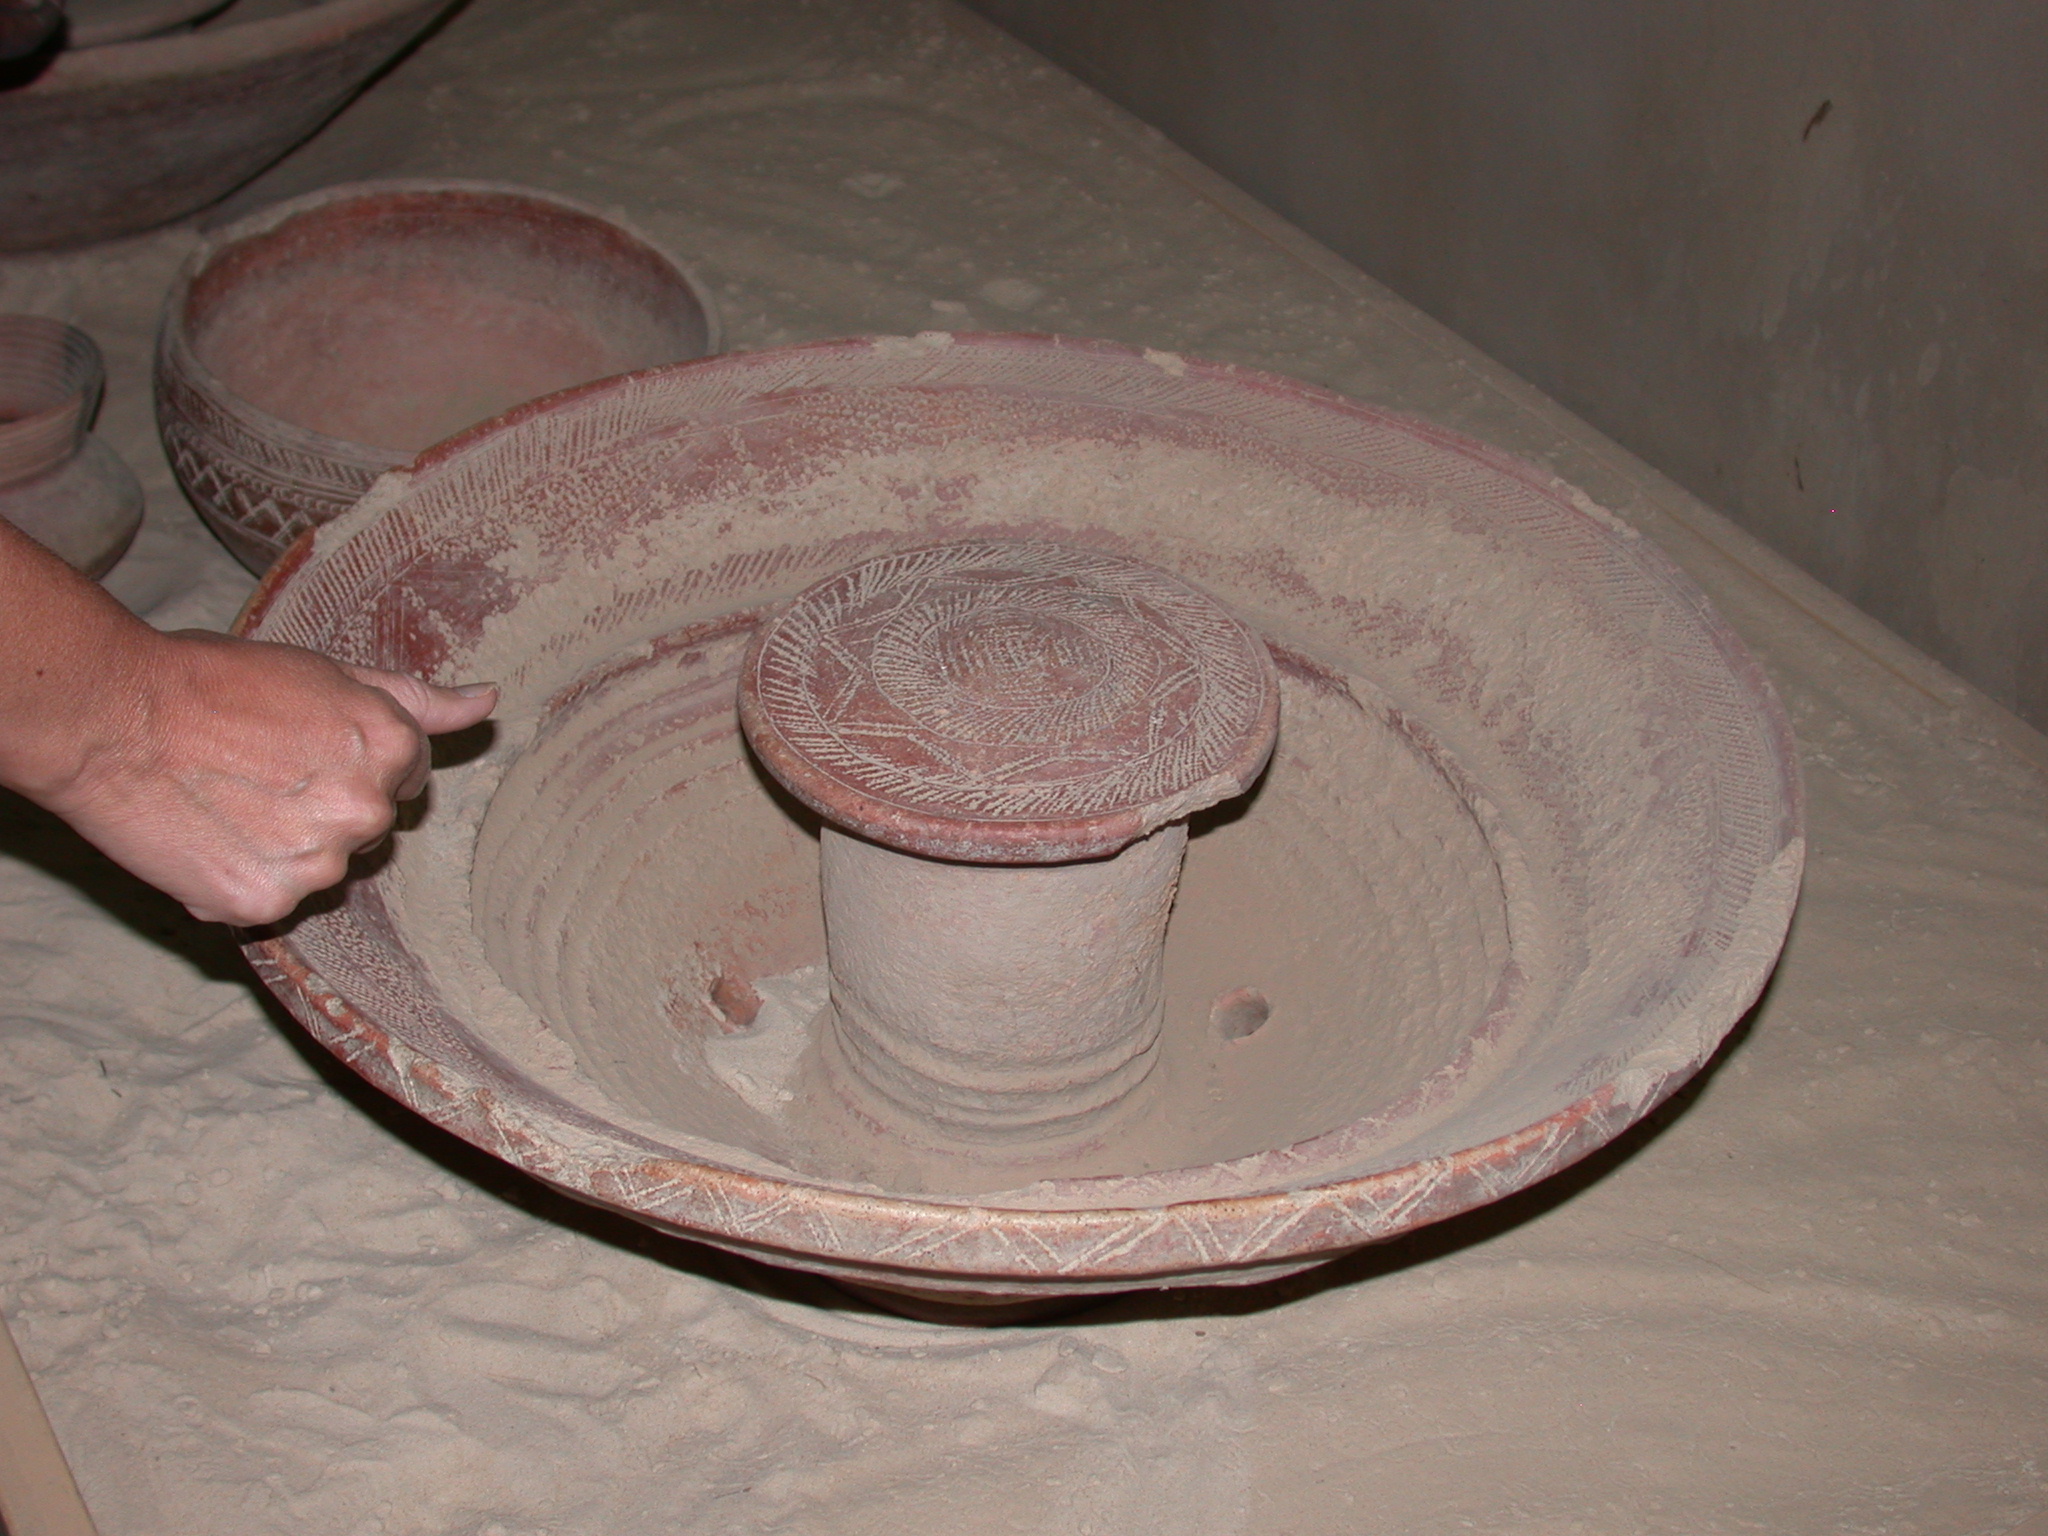 Vase for Washing Hands Before and After Meals, Timbuktu Ethnological Museum, Timbuktu, Mali